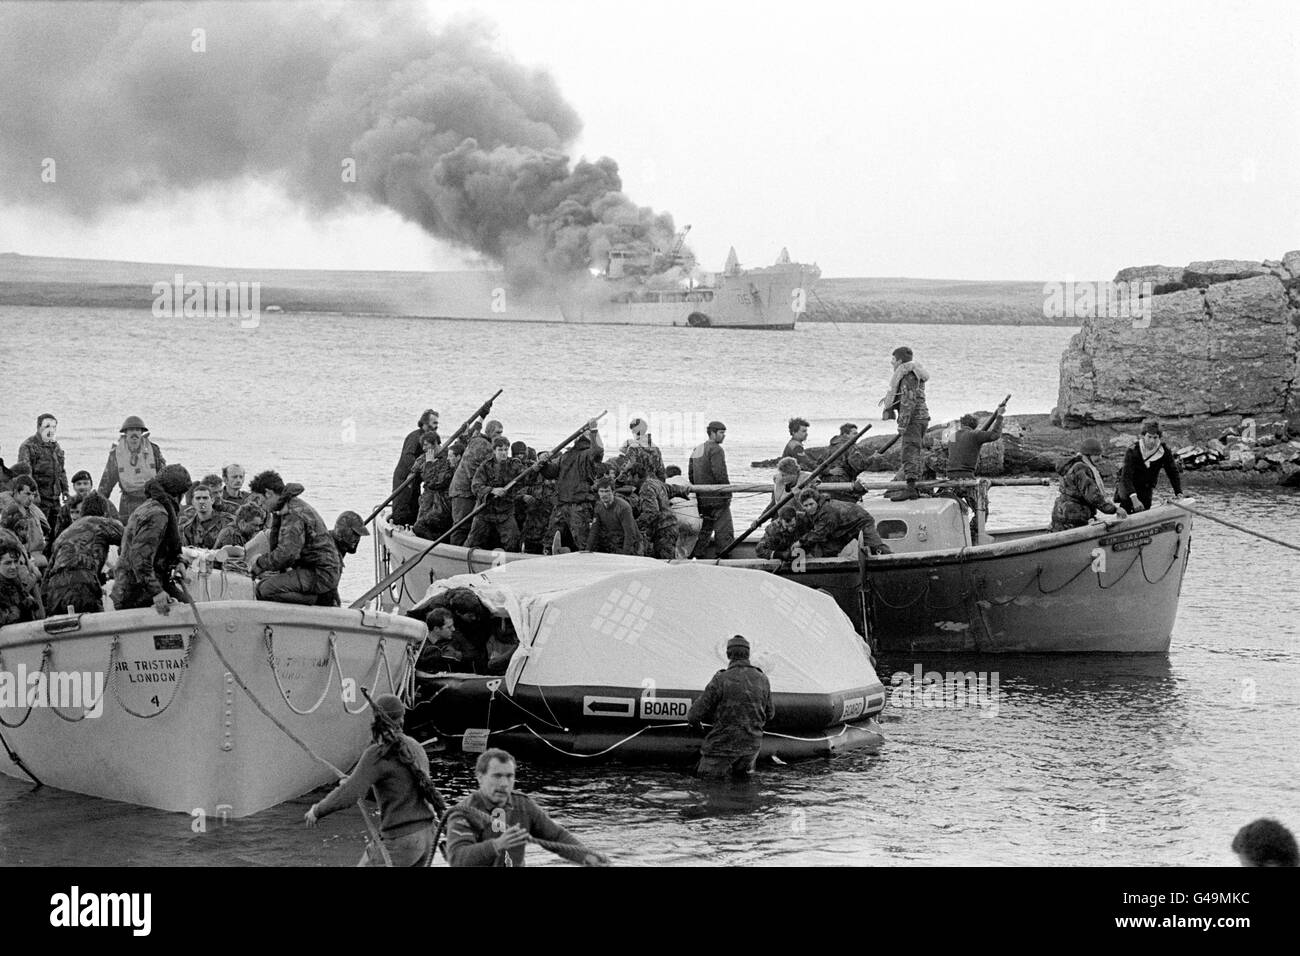 THE FALKLANDS WAR 29/6/82 BLUFF COVE. SURVIVORS COME ASHORE FROM THE BLAZING HMS SIR GALAHAD SHIP AFTER THE DEVASTATING ARGENTINIAN AIR ATTACK AT BLUFF COVE ON THE TWO BRITISH RFA LANDING SHIPS, SIR TRISTRAM AND SIR GALAHAD. *25/03/02 Survivors coming ashore from the Sir Galahad, after it was hit by an Argentinian air attack at Bluff Cove, the Falkland Islands. The 20th anniversary of the invasion of the Falklands by Argentine forces will be on April 2nd, 2002. Stock Photo